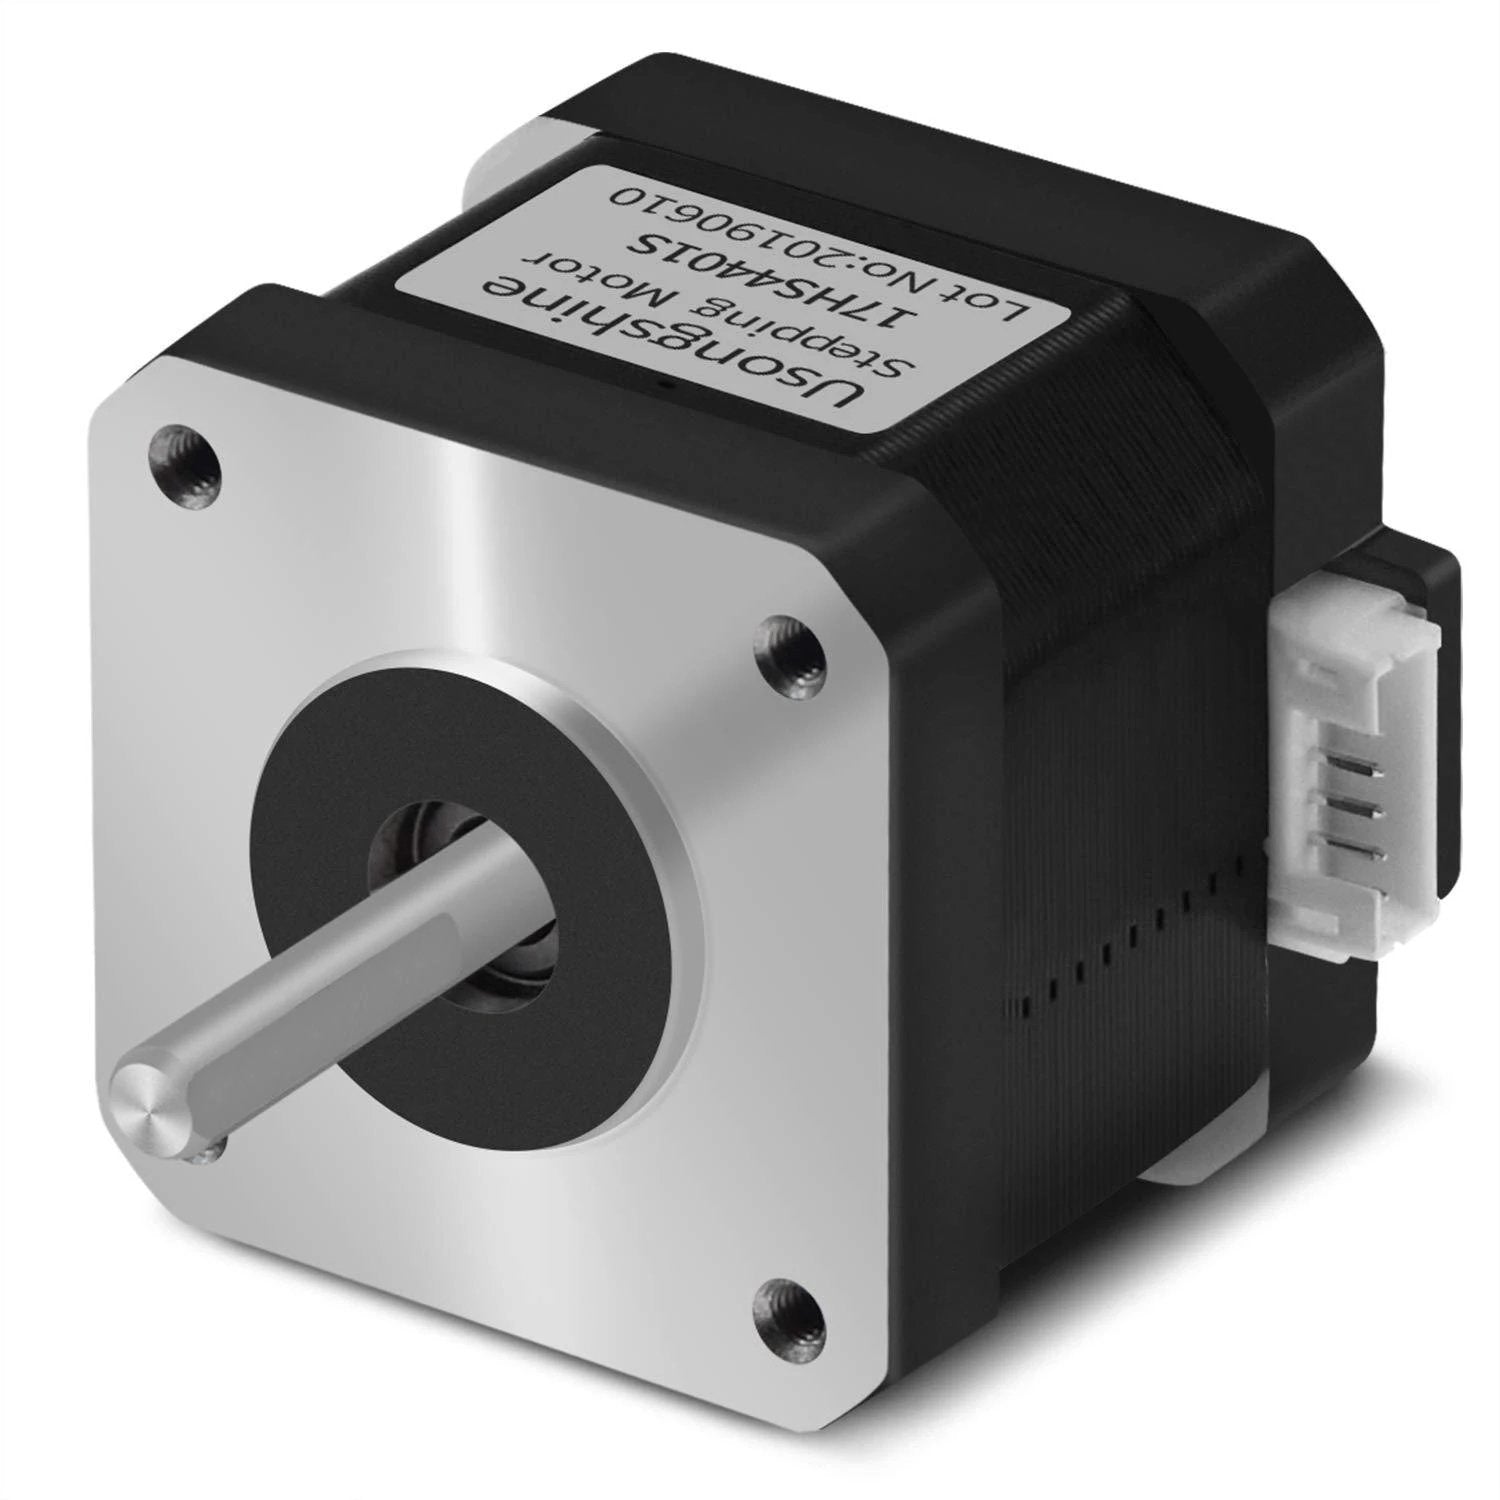 Nema 17 Stepper Motor (17HS4401S) 1.8 Degree 1.5A 42 Motor 42N.cm (60oz.in) 4-Lead with 1M Cable and Connector for DIY/CNC/3D Printer